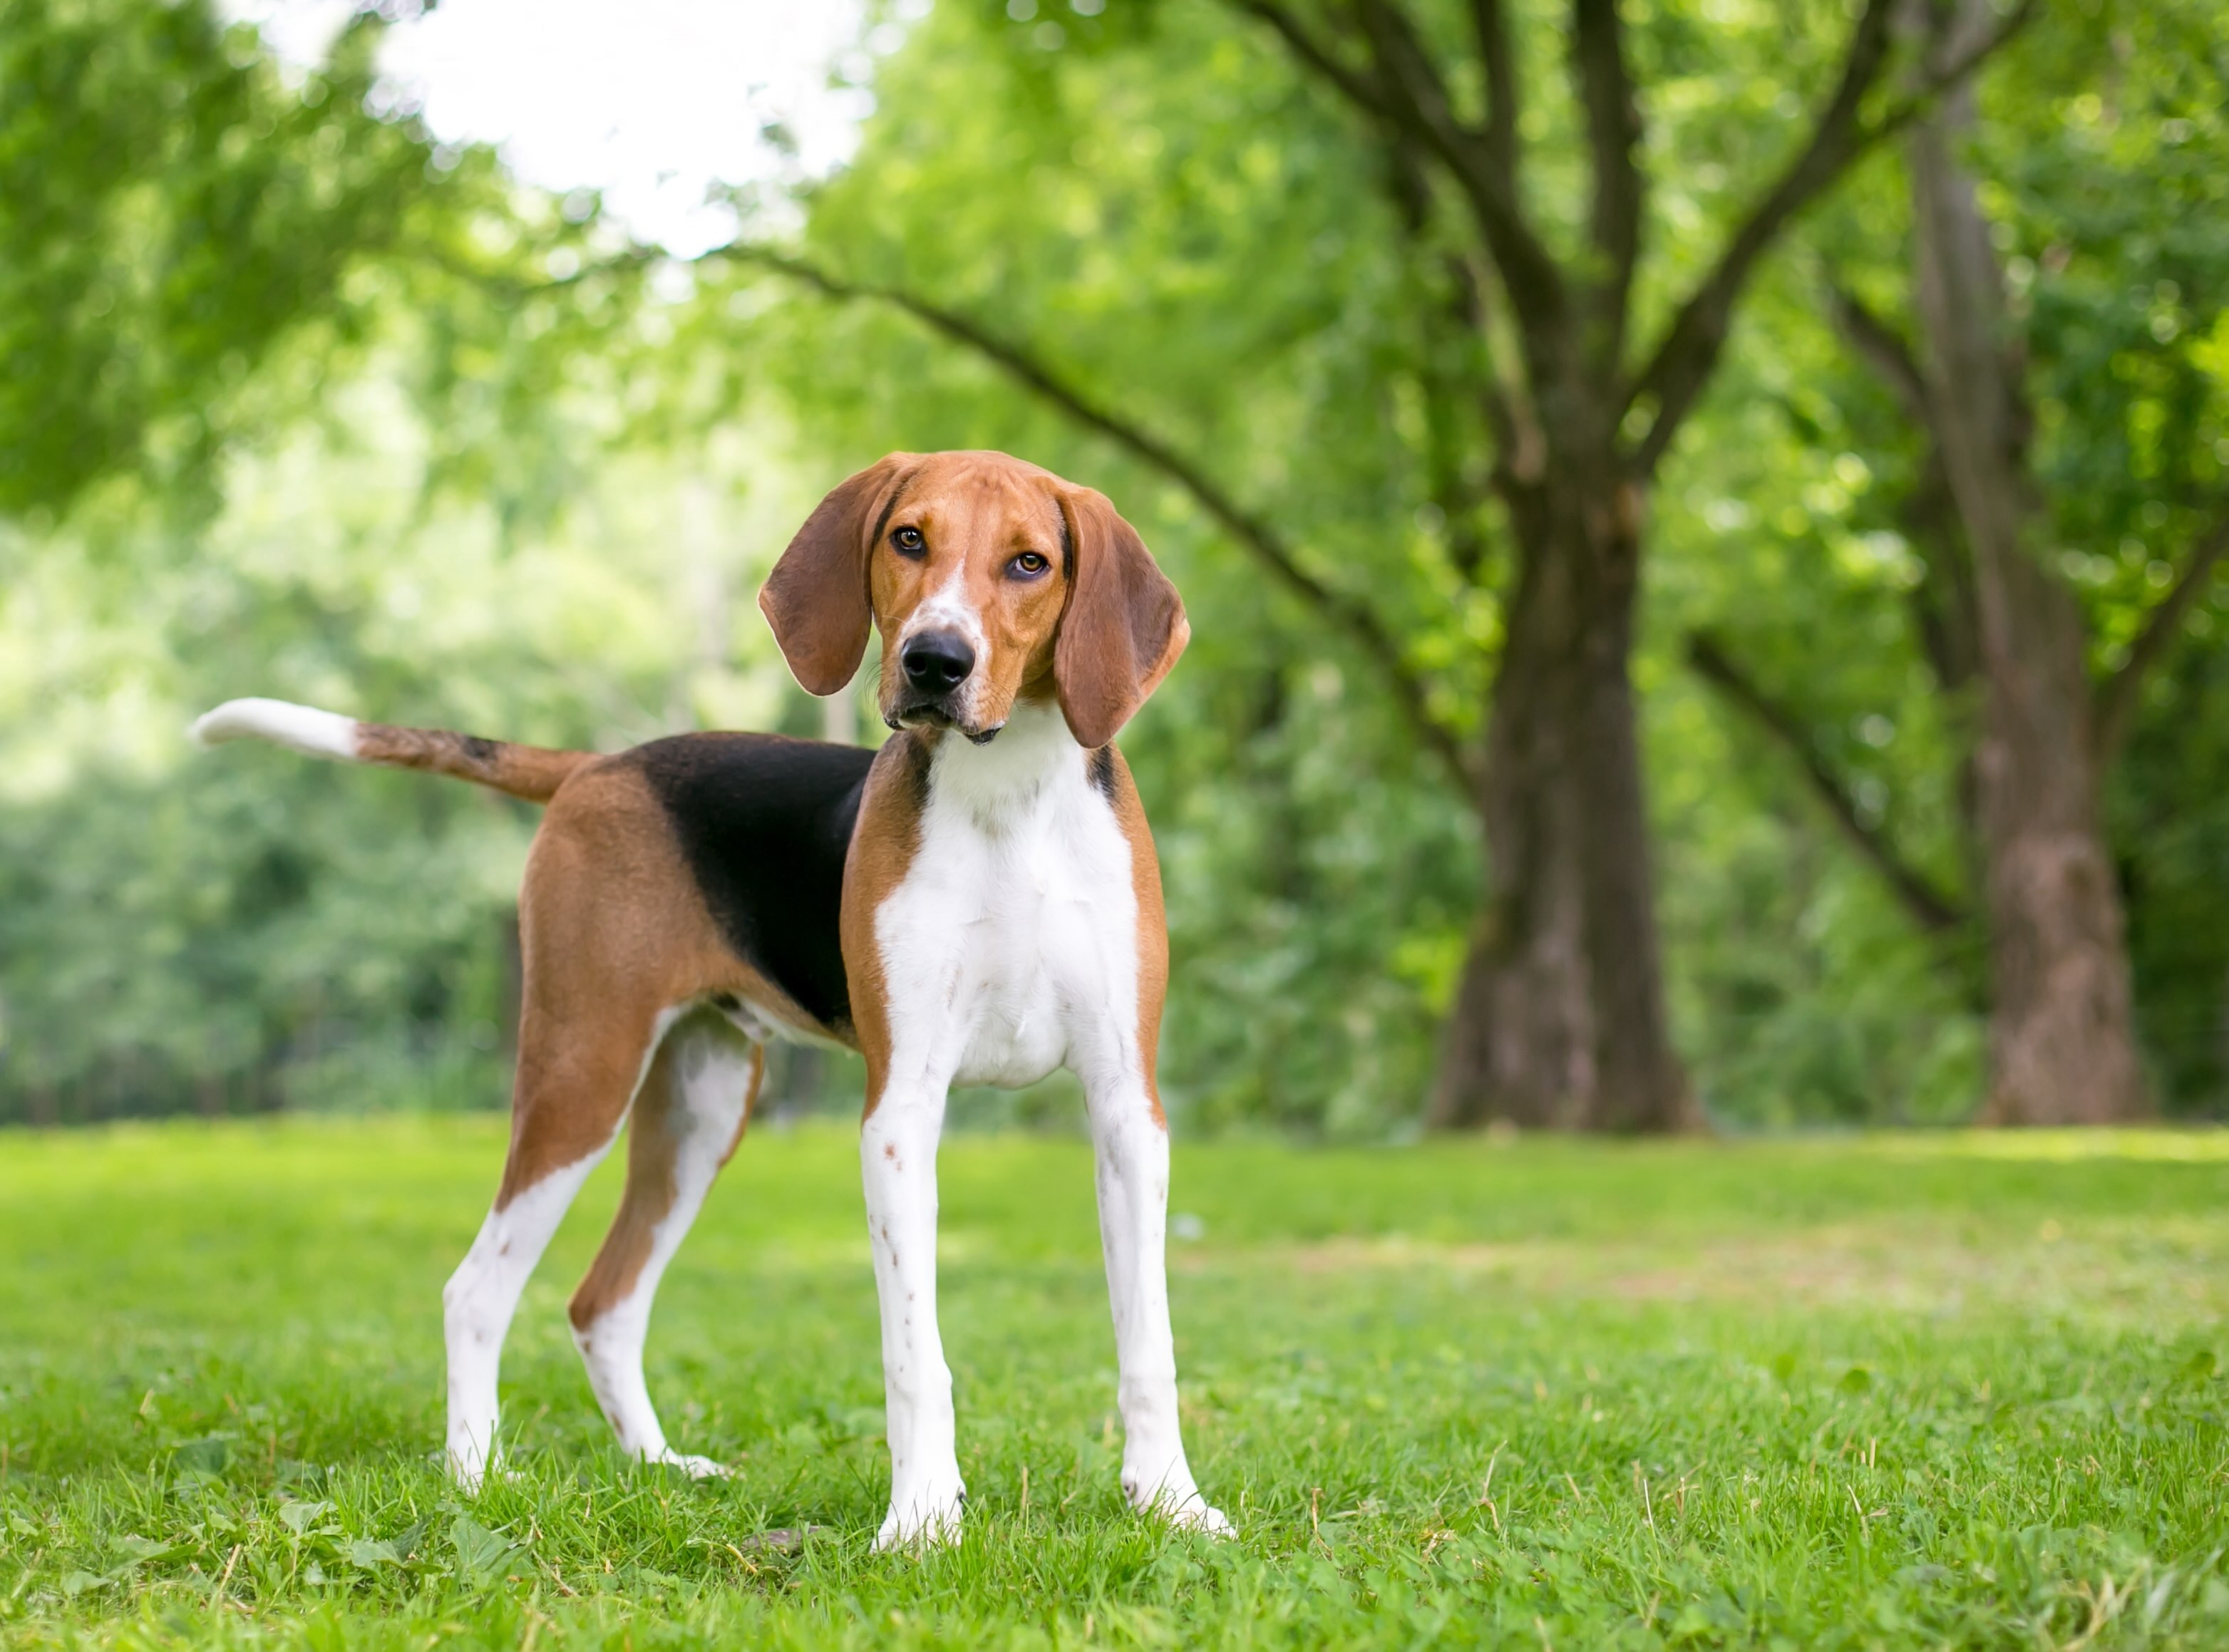 tricolor american foxhound standing and looking at the camera with his head tilted